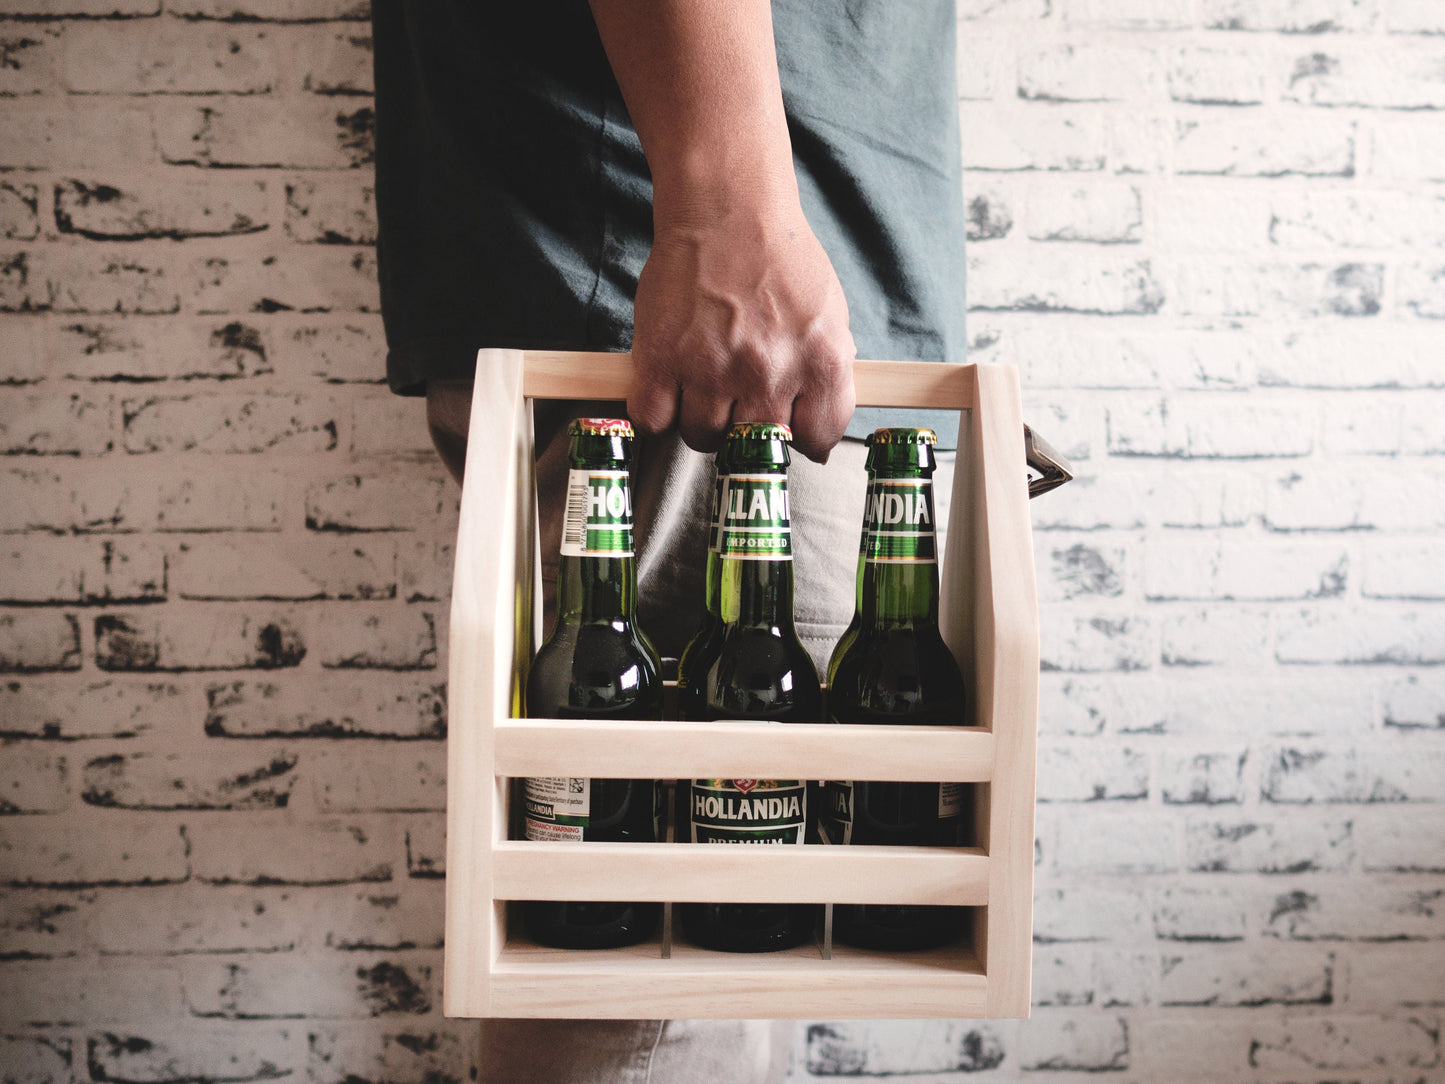 Beer Caddy - Groomsmen Gift, Personalized Wooden Beer Caddy, Gift for Dad, Gift for Husband, Father's Day Gift, Beer Carrier